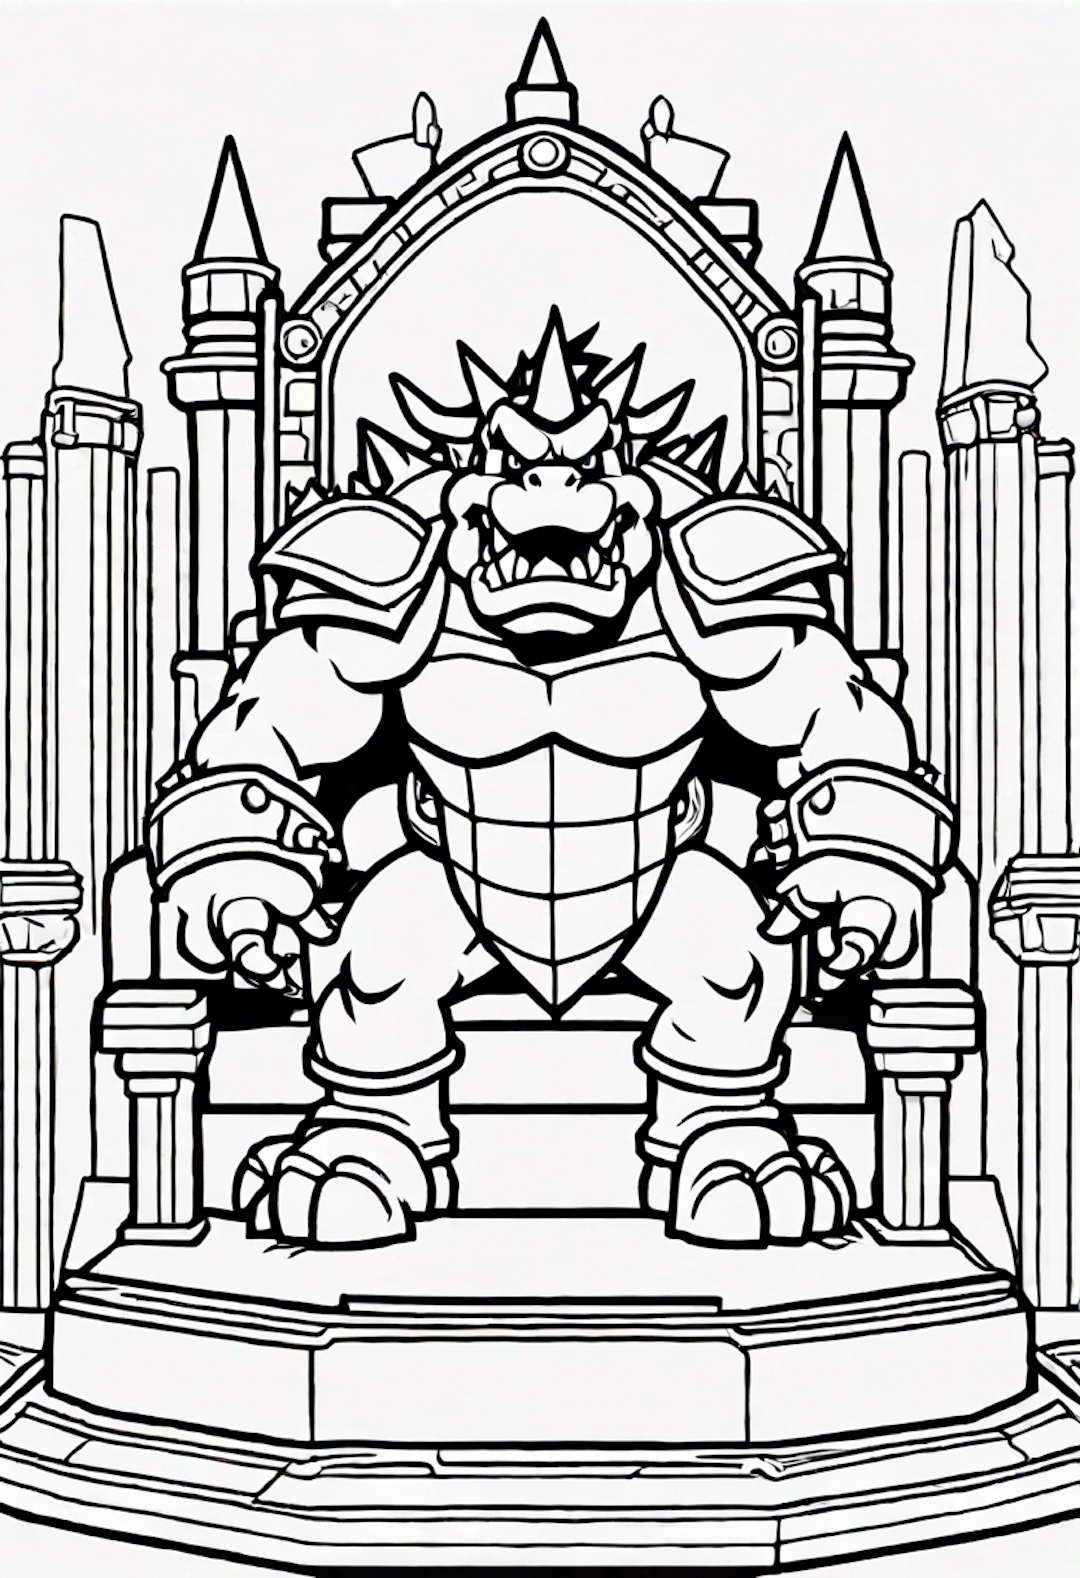 Bowser At The Bowsers Castle Throne Room